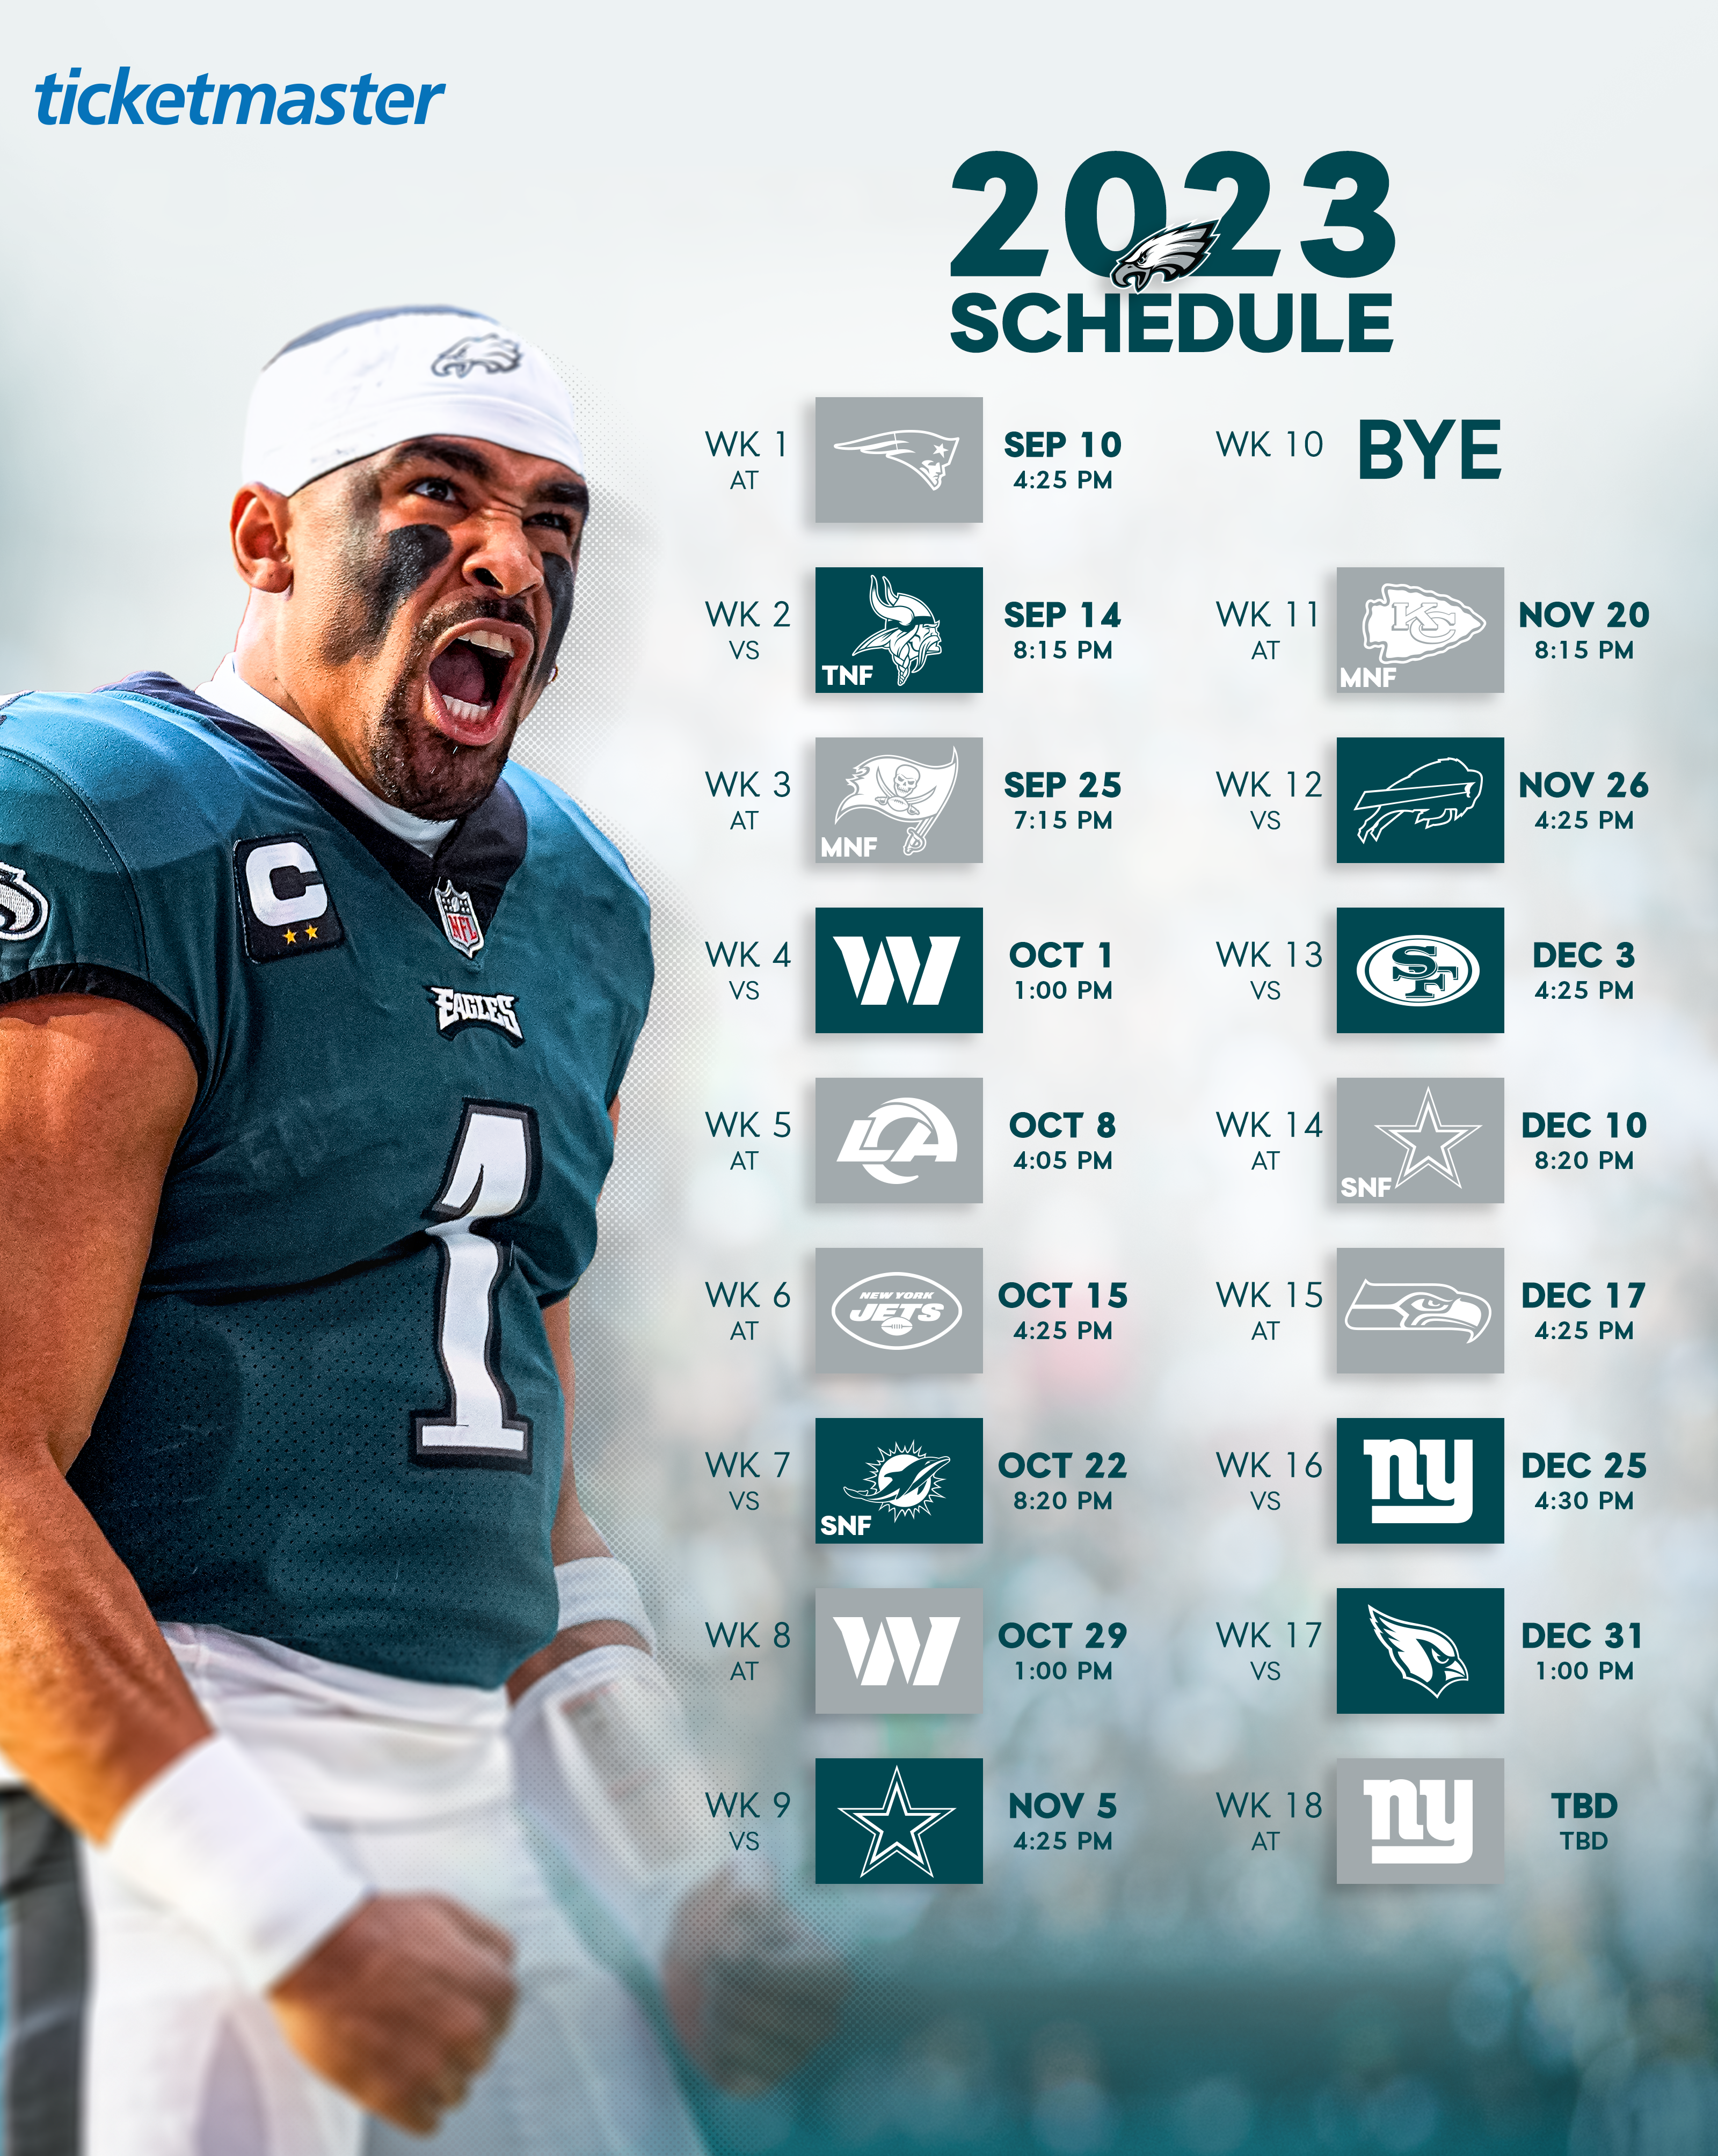 football eagles schedule